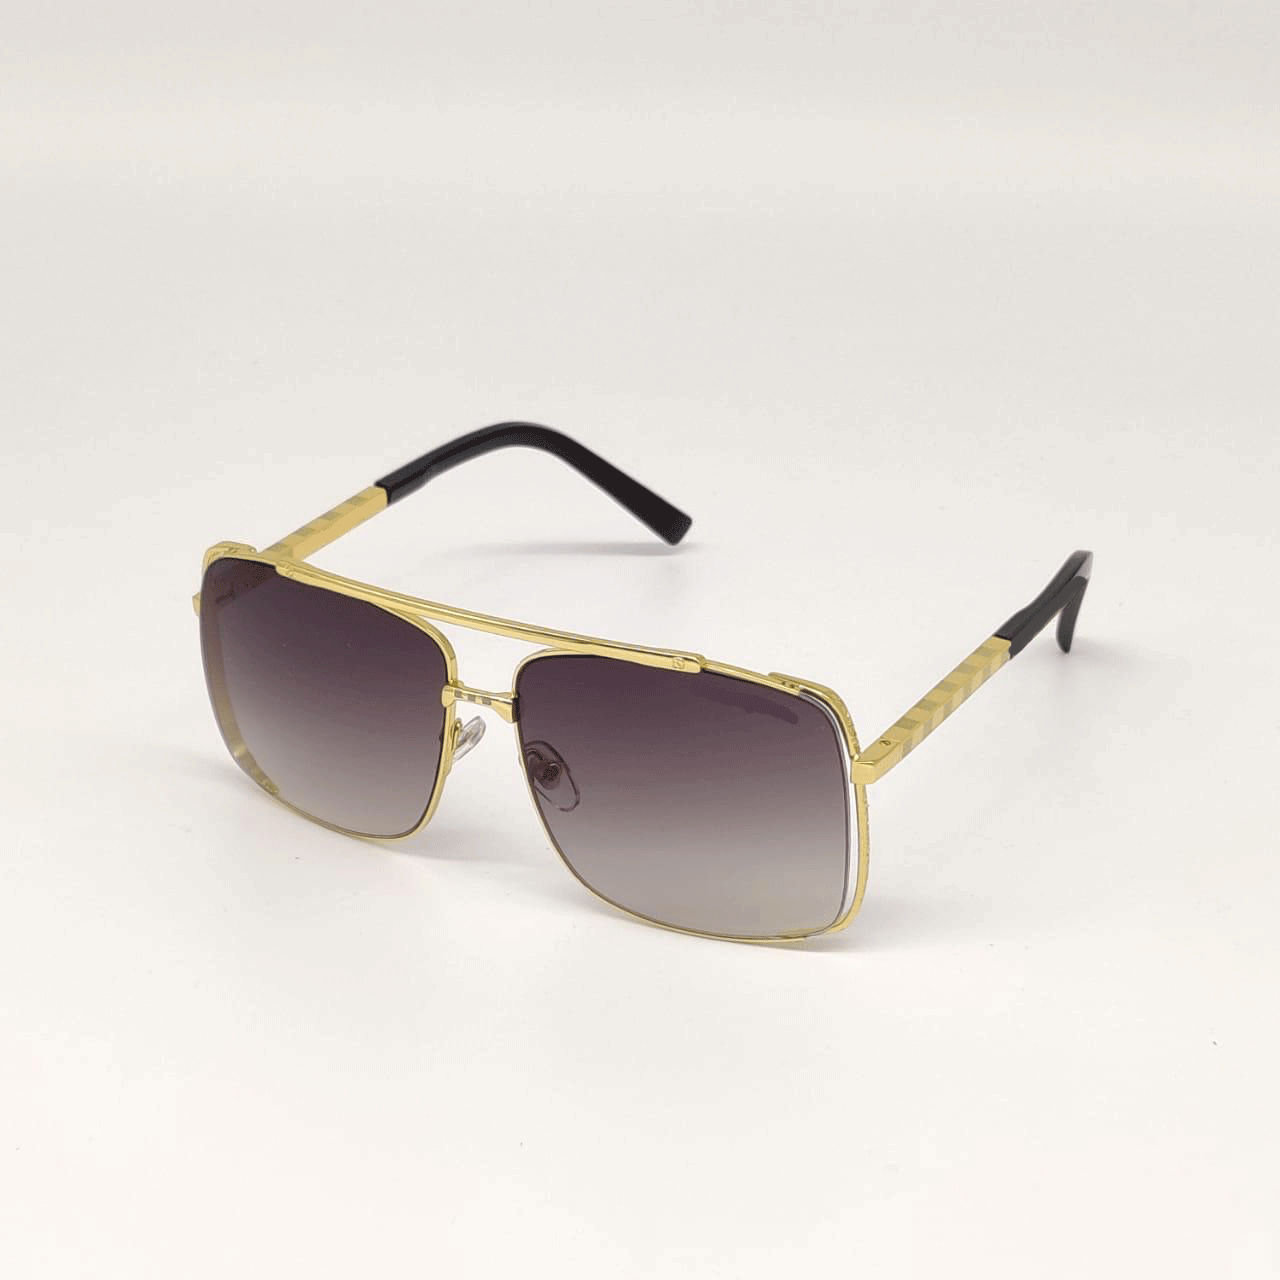 Stylish Metal Square Classic Sunglasses For Men And Women-Unique and Classy